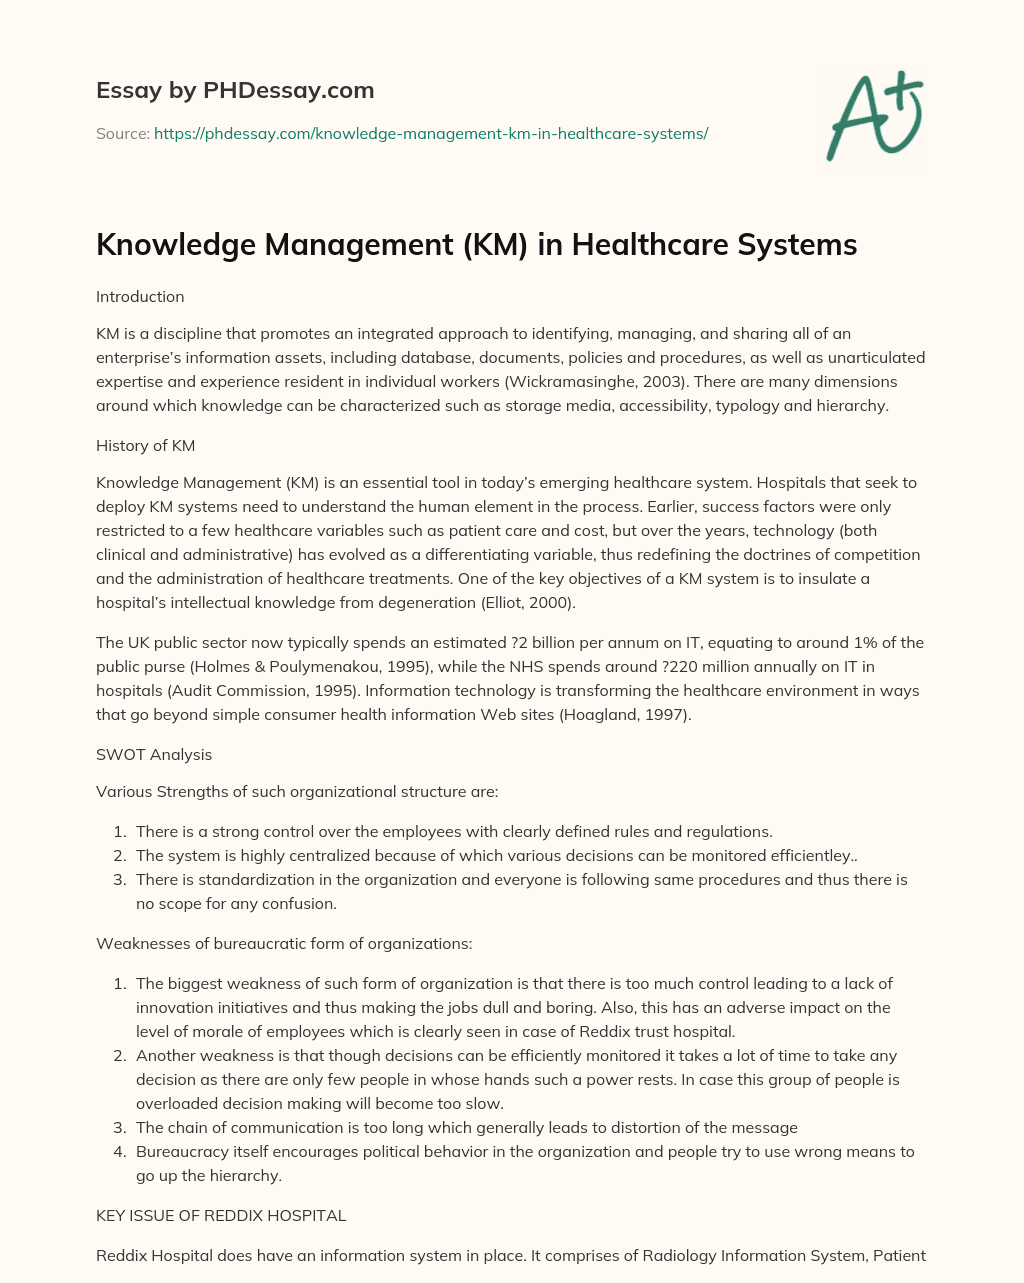 Knowledge Management (KM) in Healthcare Systems essay